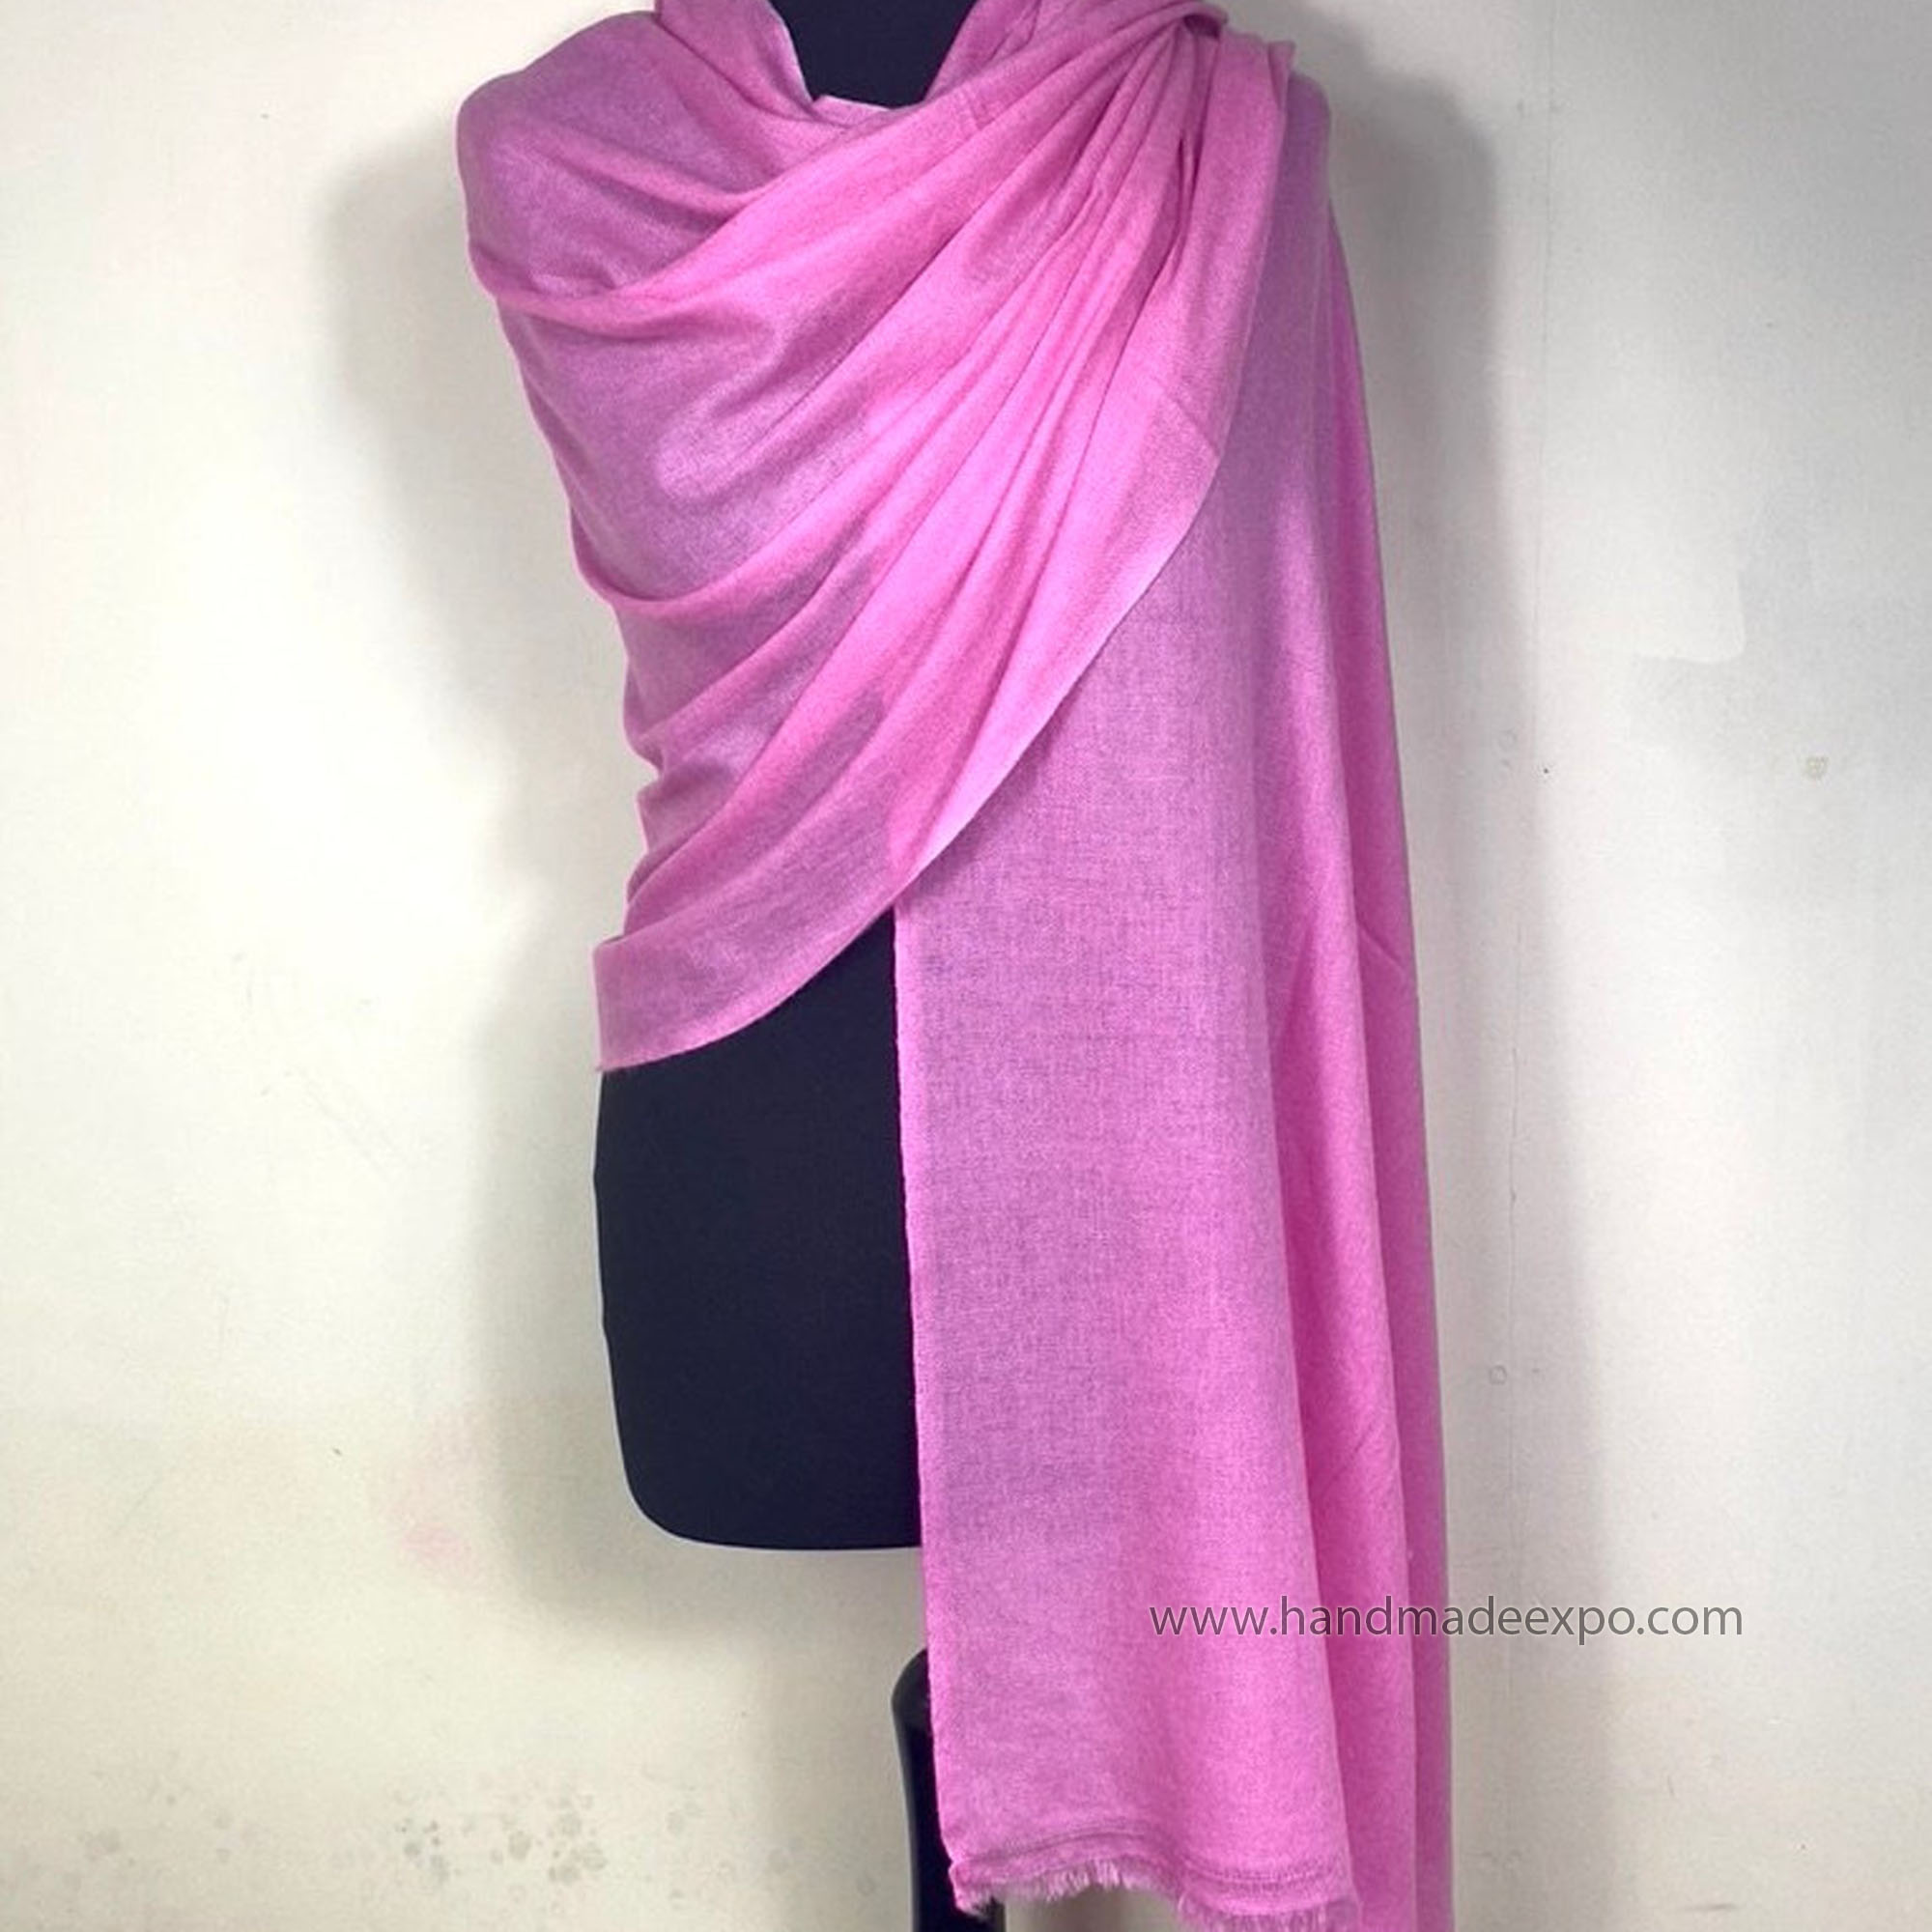 Pashmina Shawl, Nepali Handmade Shawl, In Four Ply Wool, Color Dye pink Color